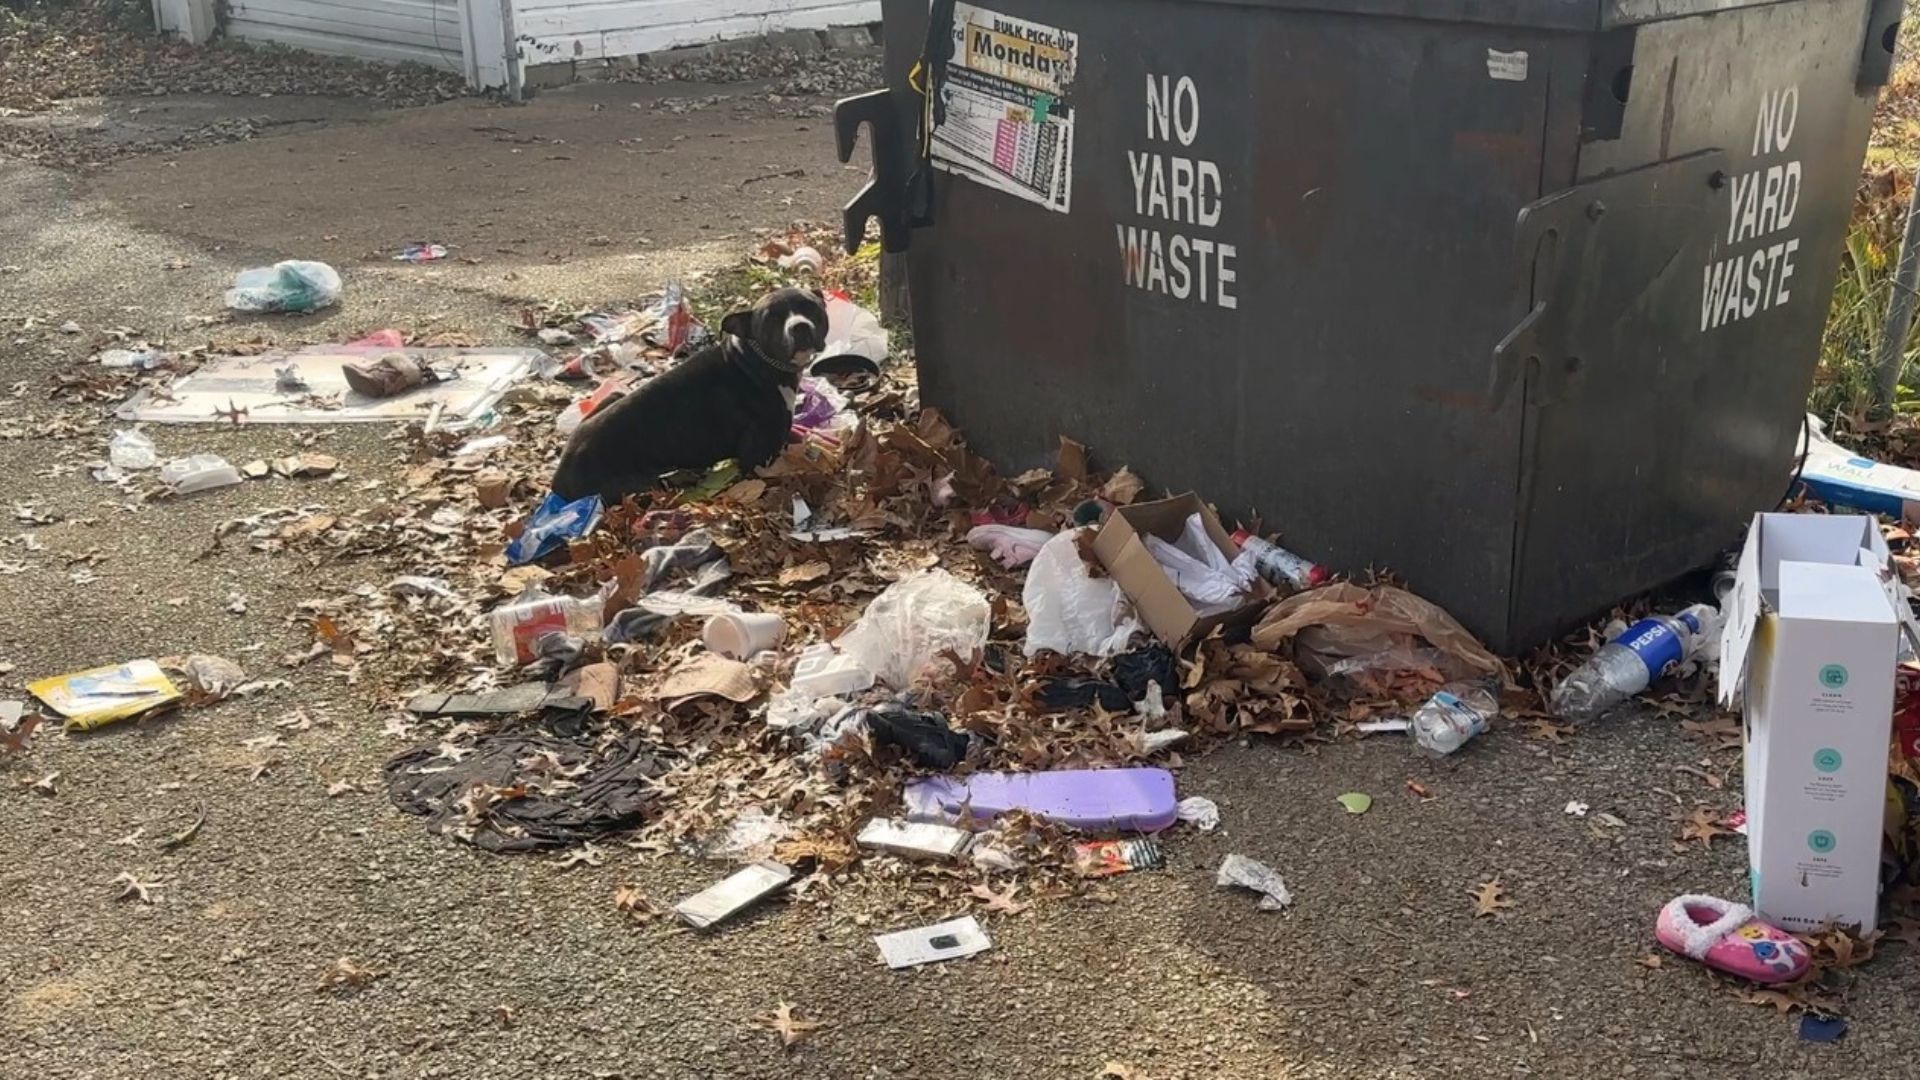 Rescuers Were Surprised To Find A Sweet Pup Tied To A Dumpster And Went To Help Her